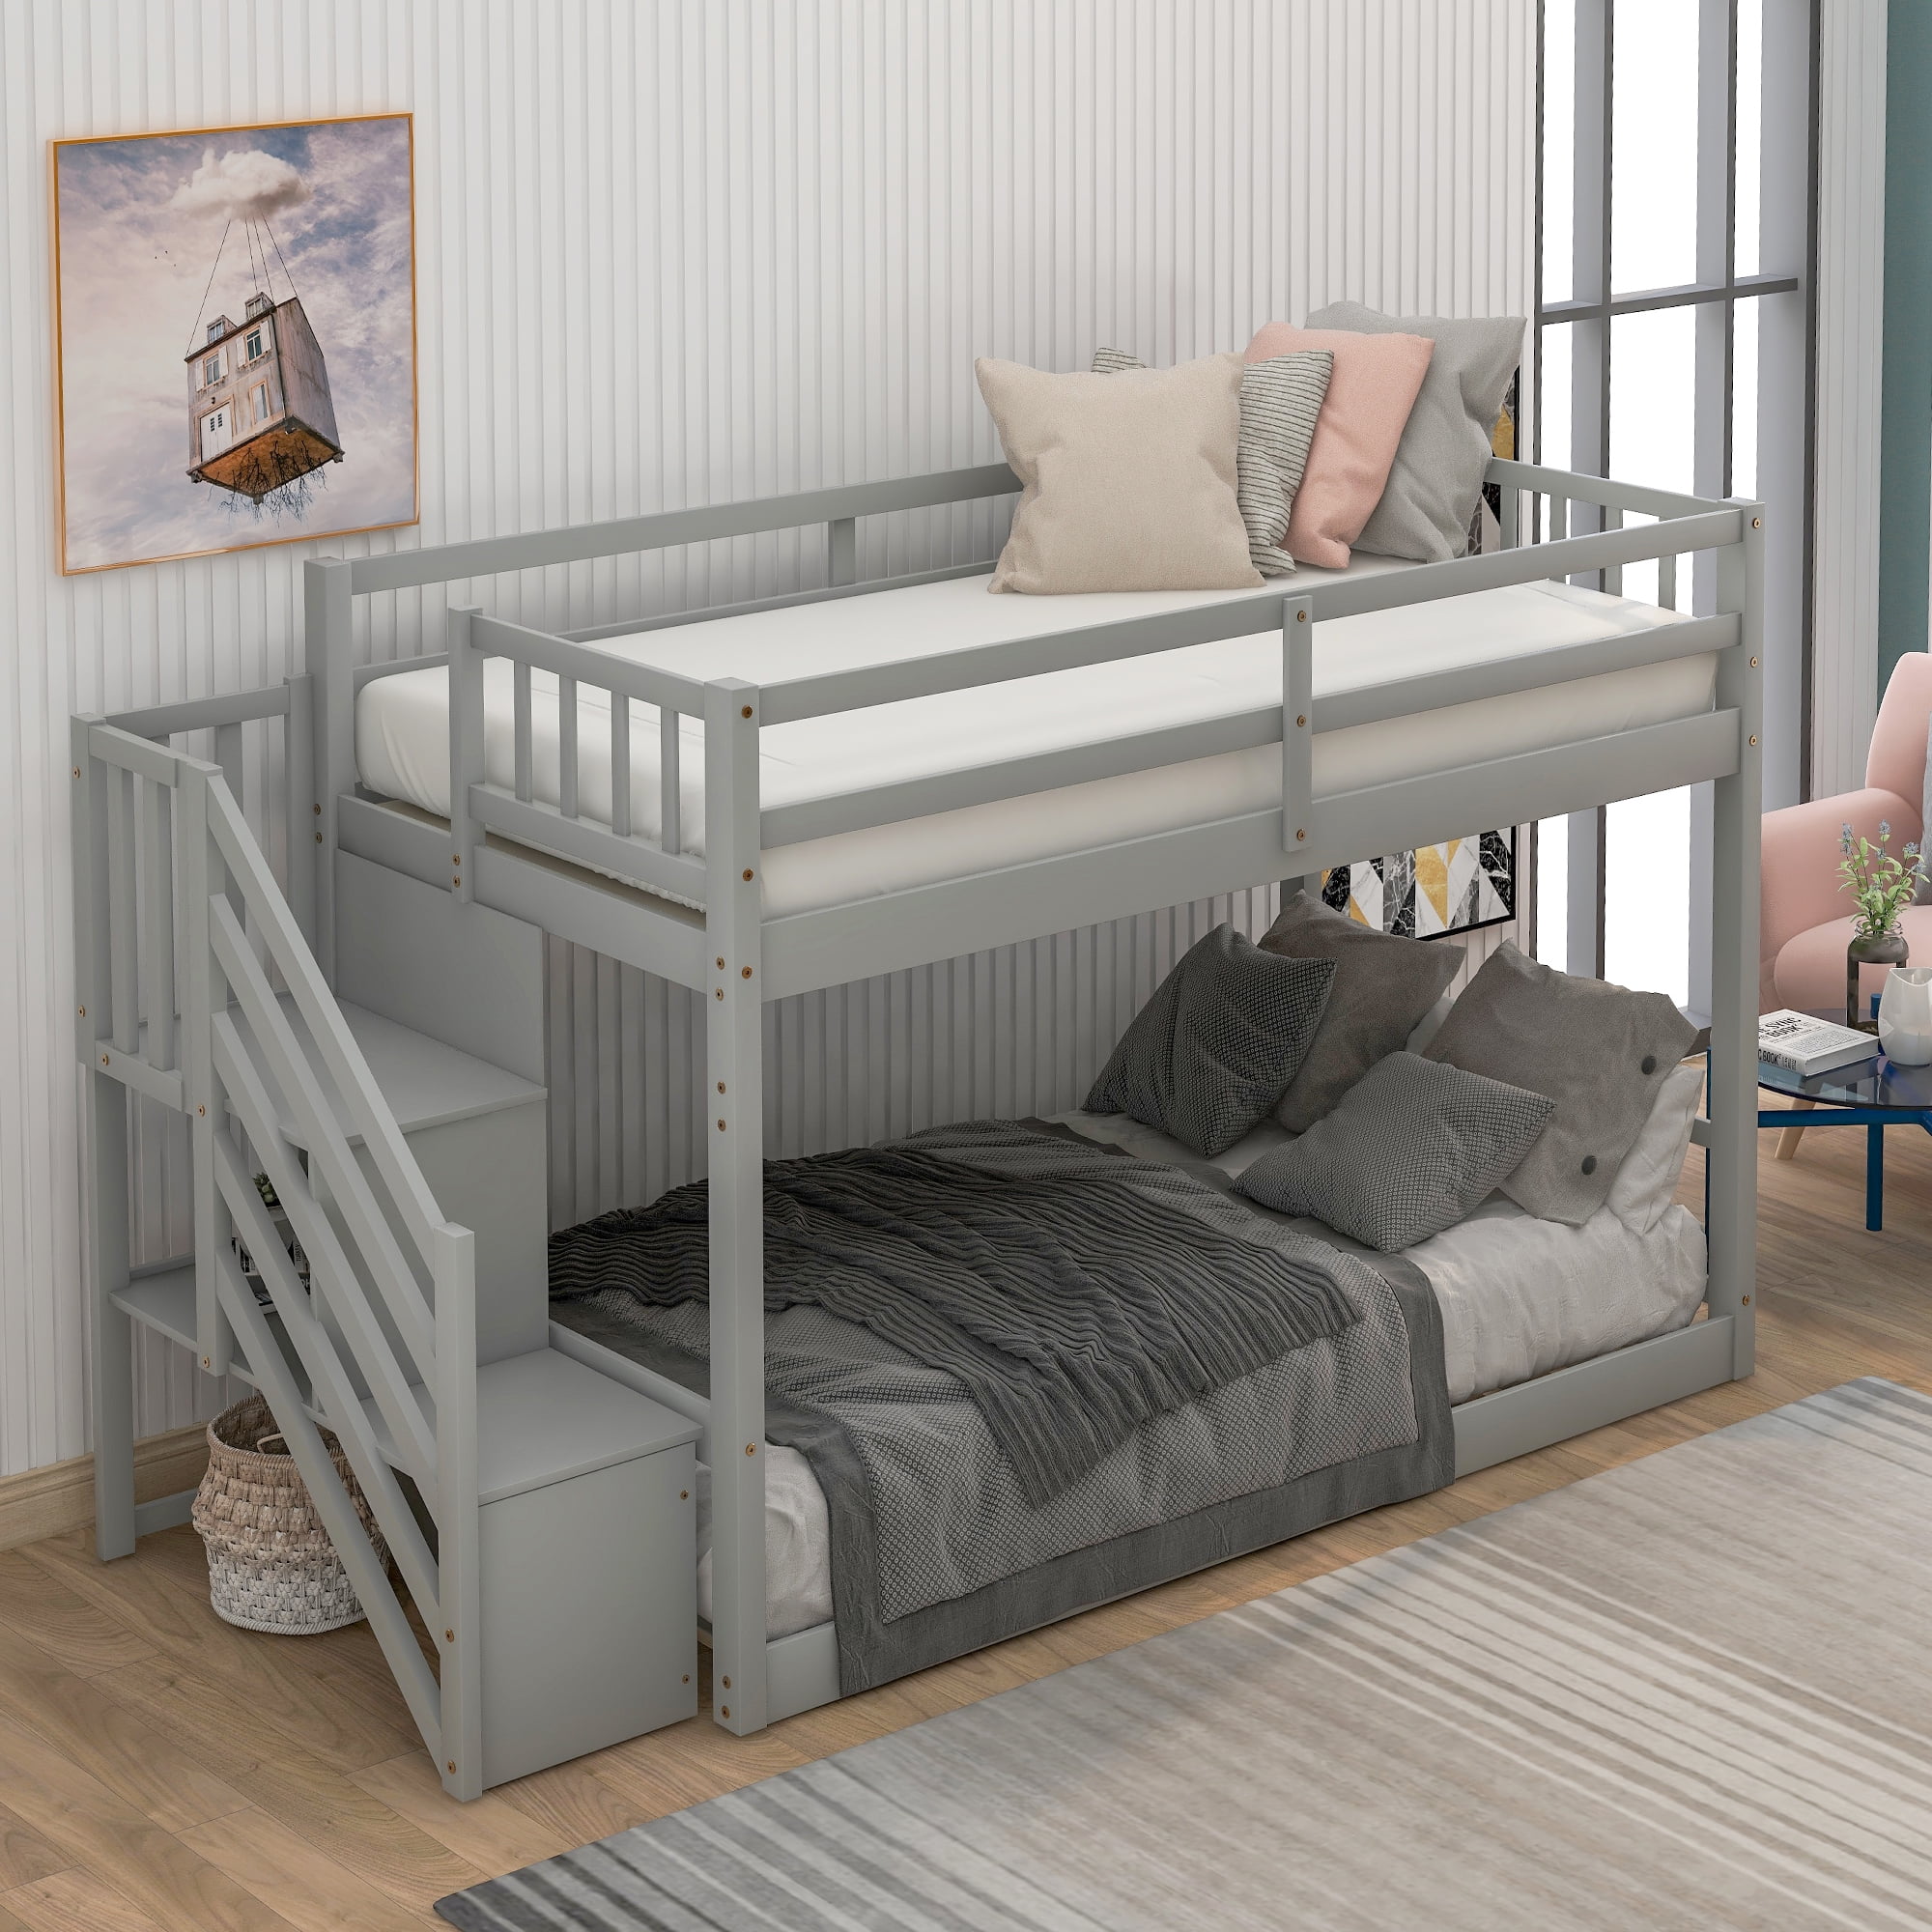 Euroco Wood Twin Over Floor Bunk, Fortis Twin Staircase Bunk Bed With Trundle